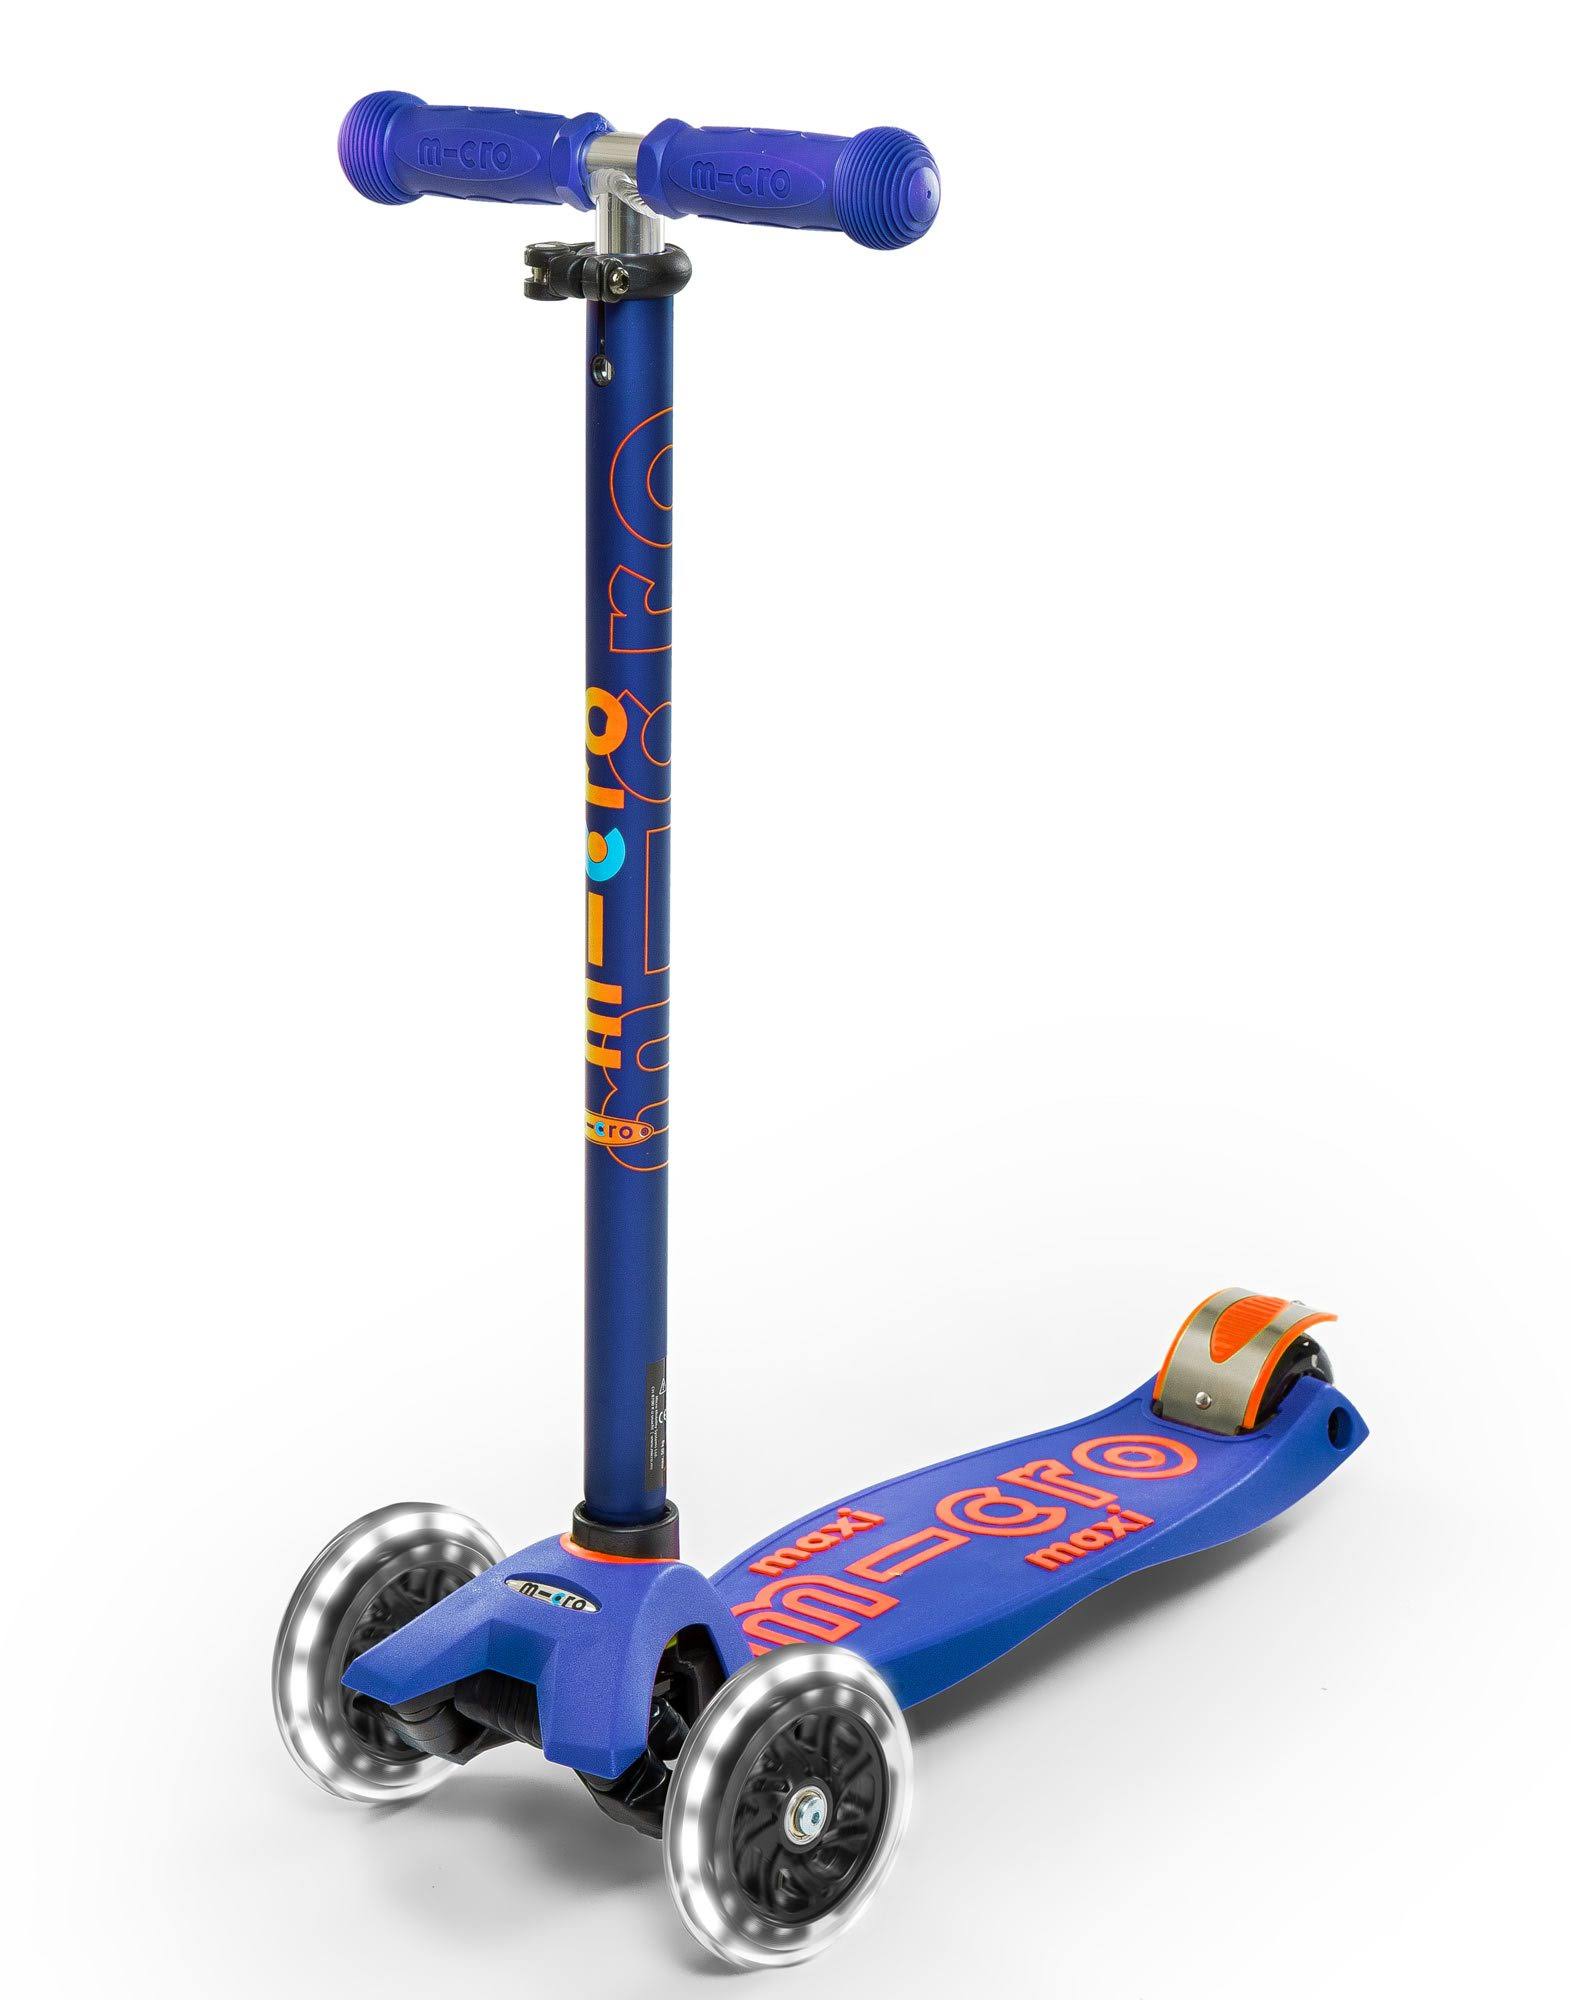 Maxi Deluxe LED Light-Up Scooter - Blue